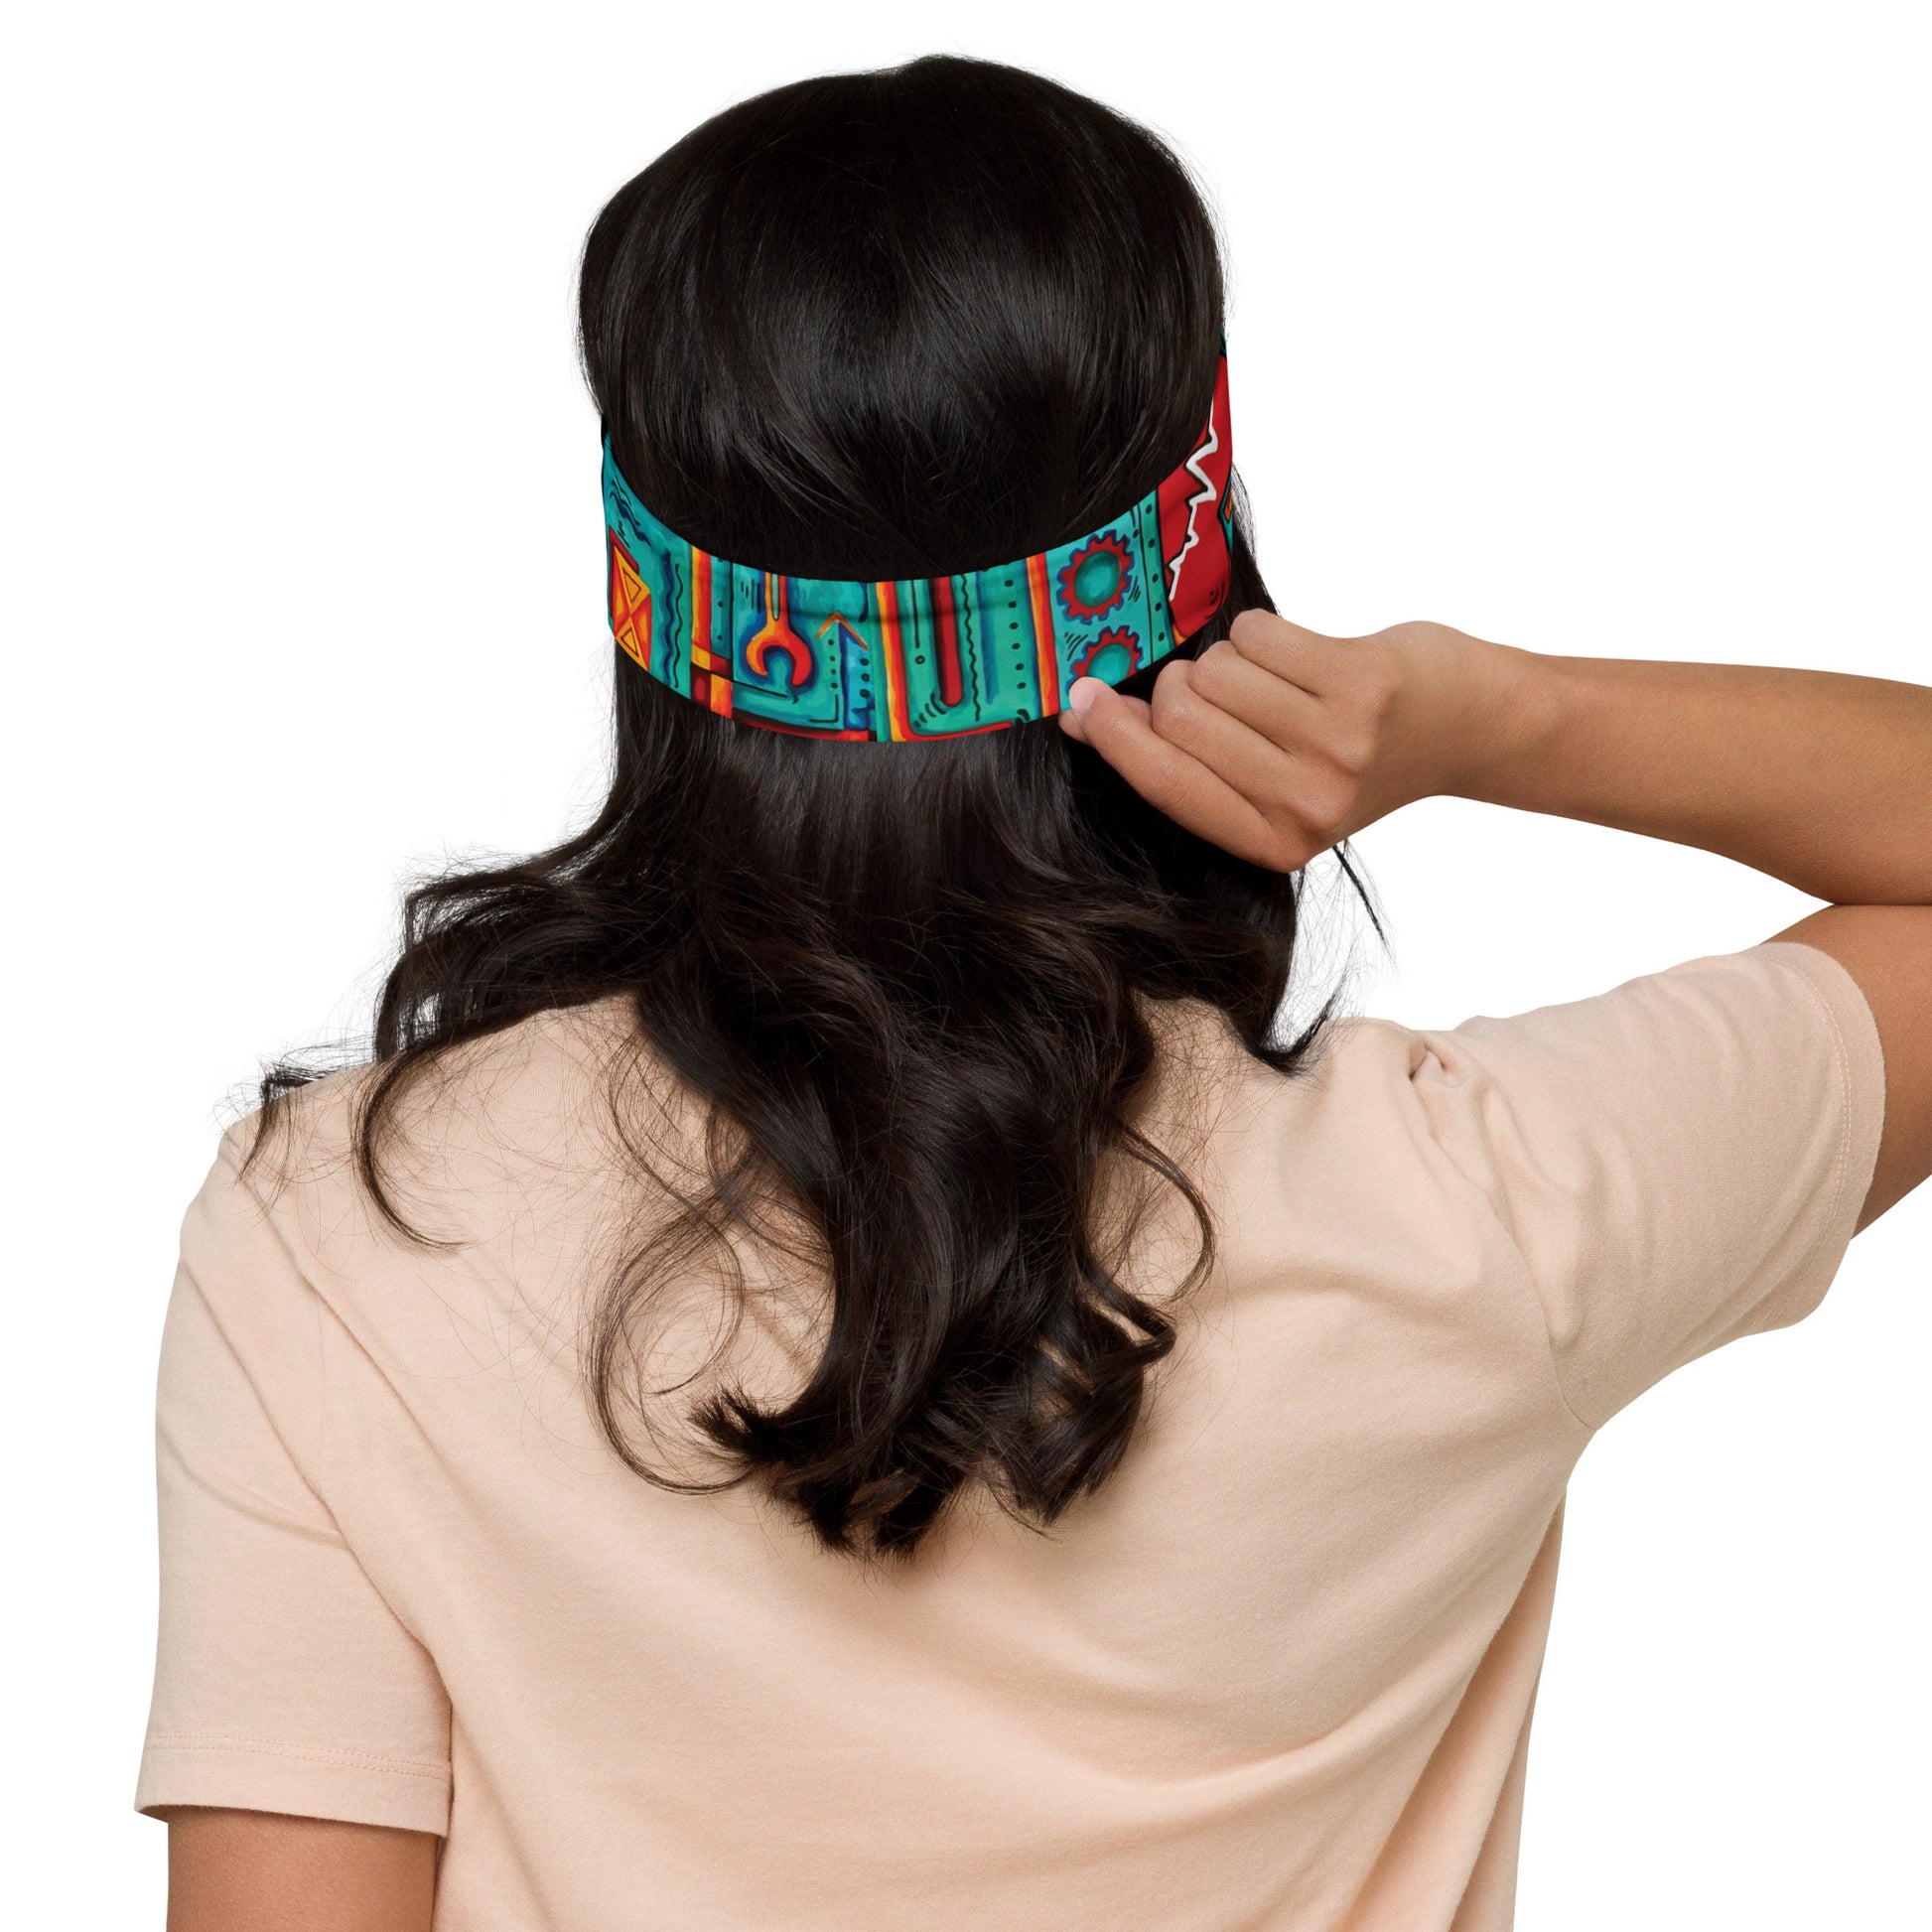 aroon brand cycling headband in reds, oranges and teal featuring a unique fun design of cycling chains gears and more